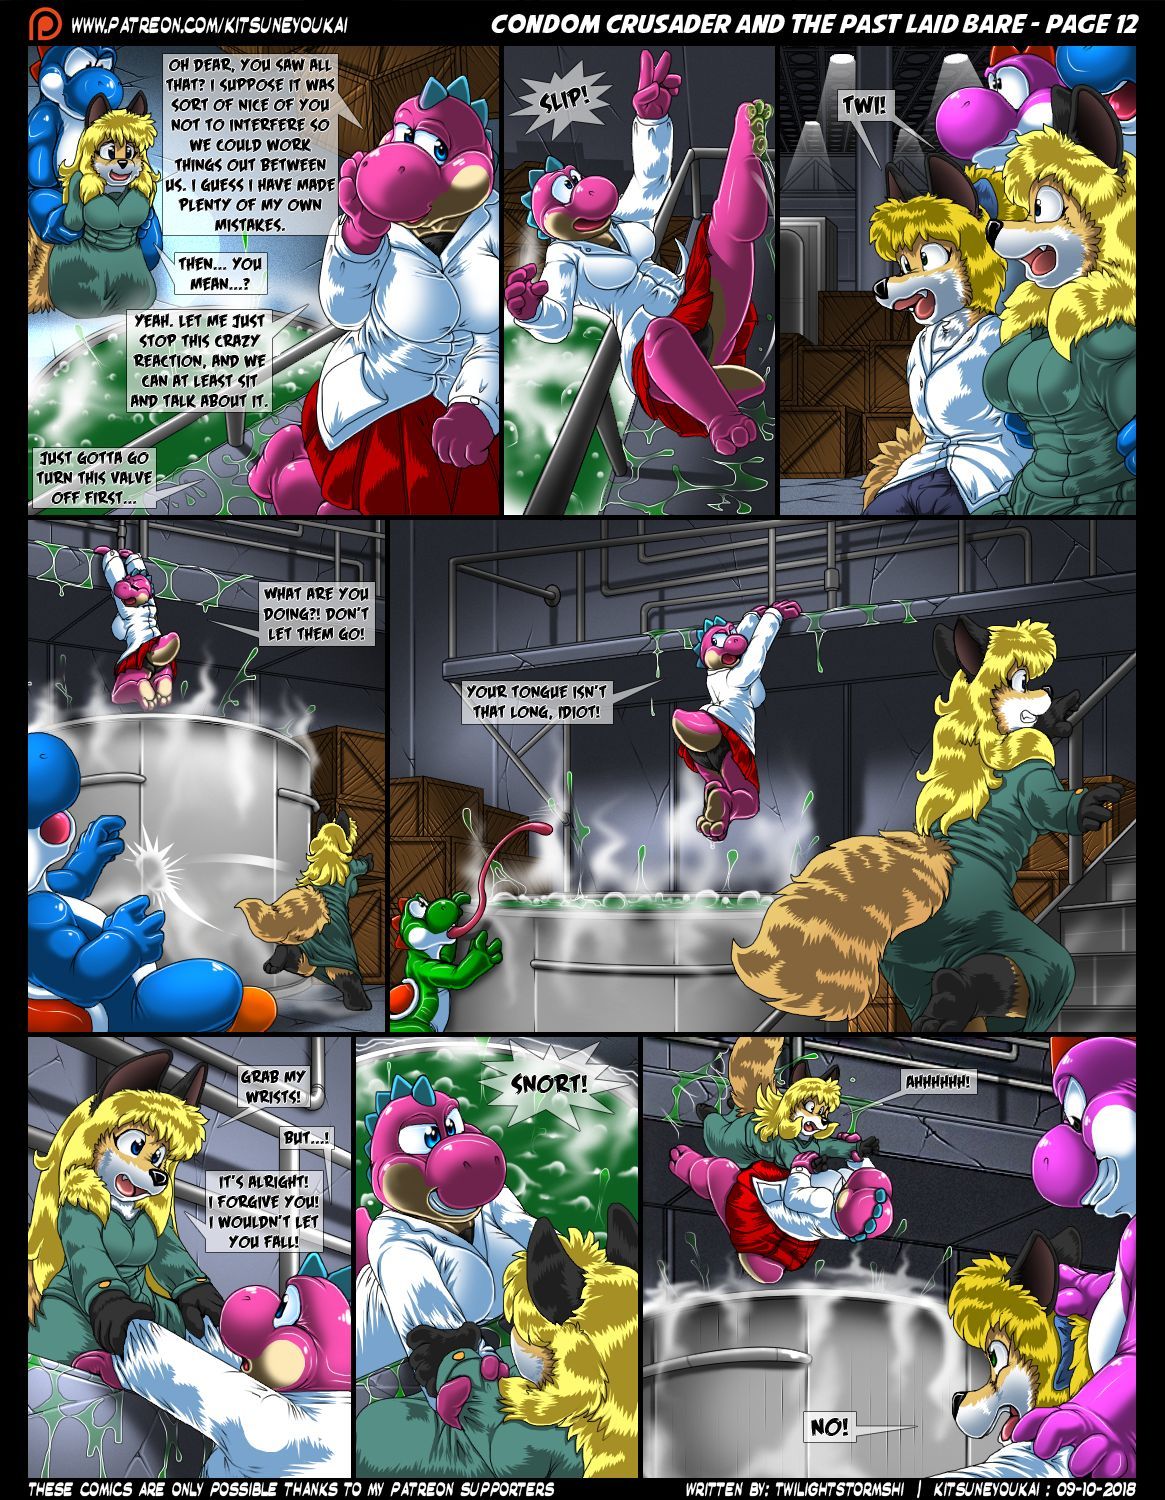 Condom Crusader and the Past Laid Bare by kitsuneyoukai page 12